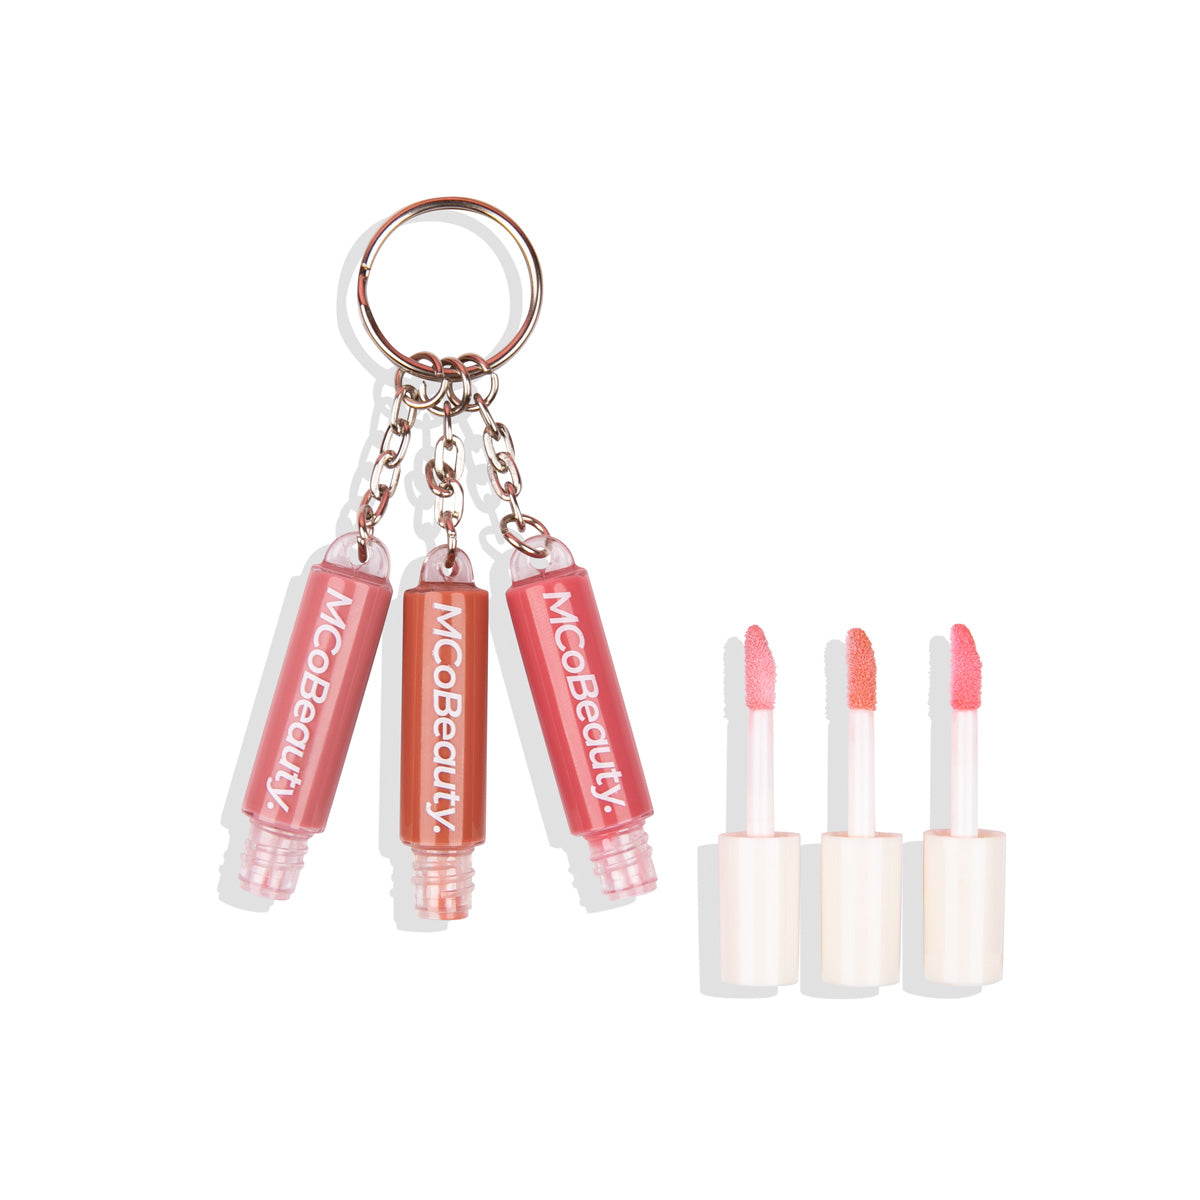 Keychain and Lip-gloss Bundle  Best Price in 2023 at HBKBoutique